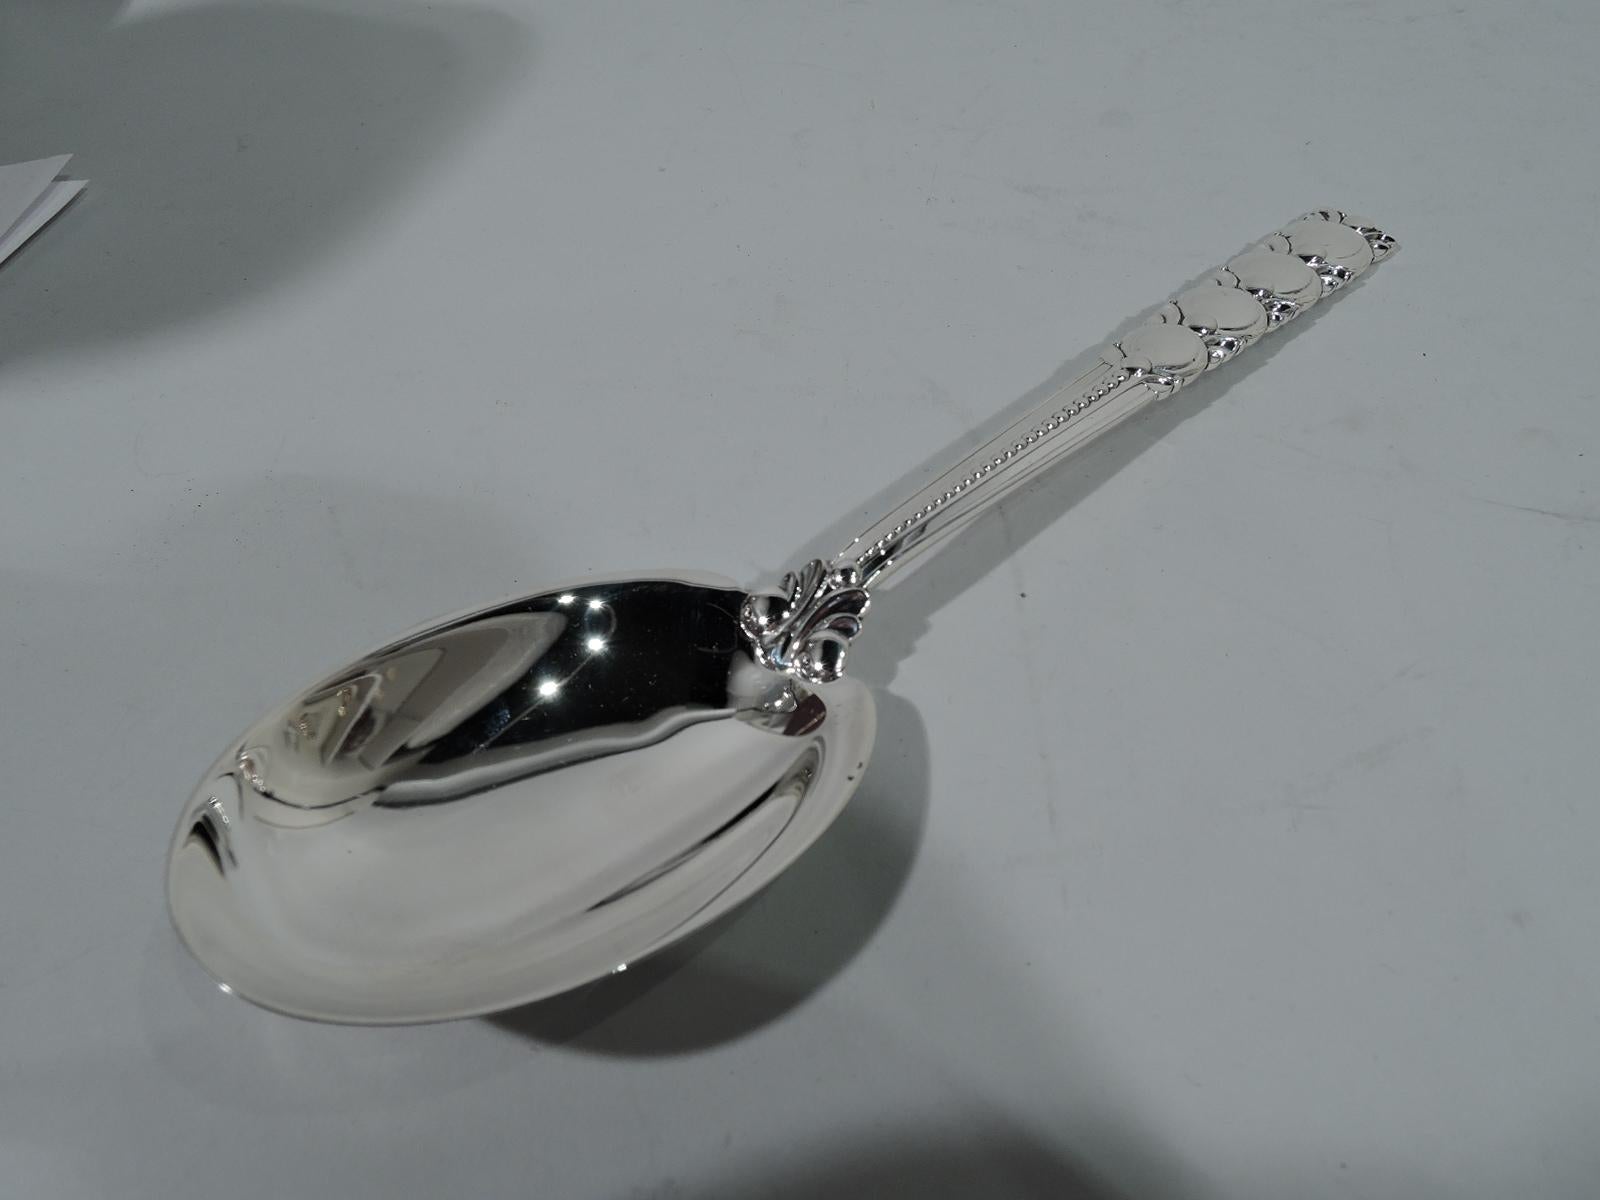 American Tiffany Mid-Century Modern Sterling Silver Tomato Serving Bowl with Spoon